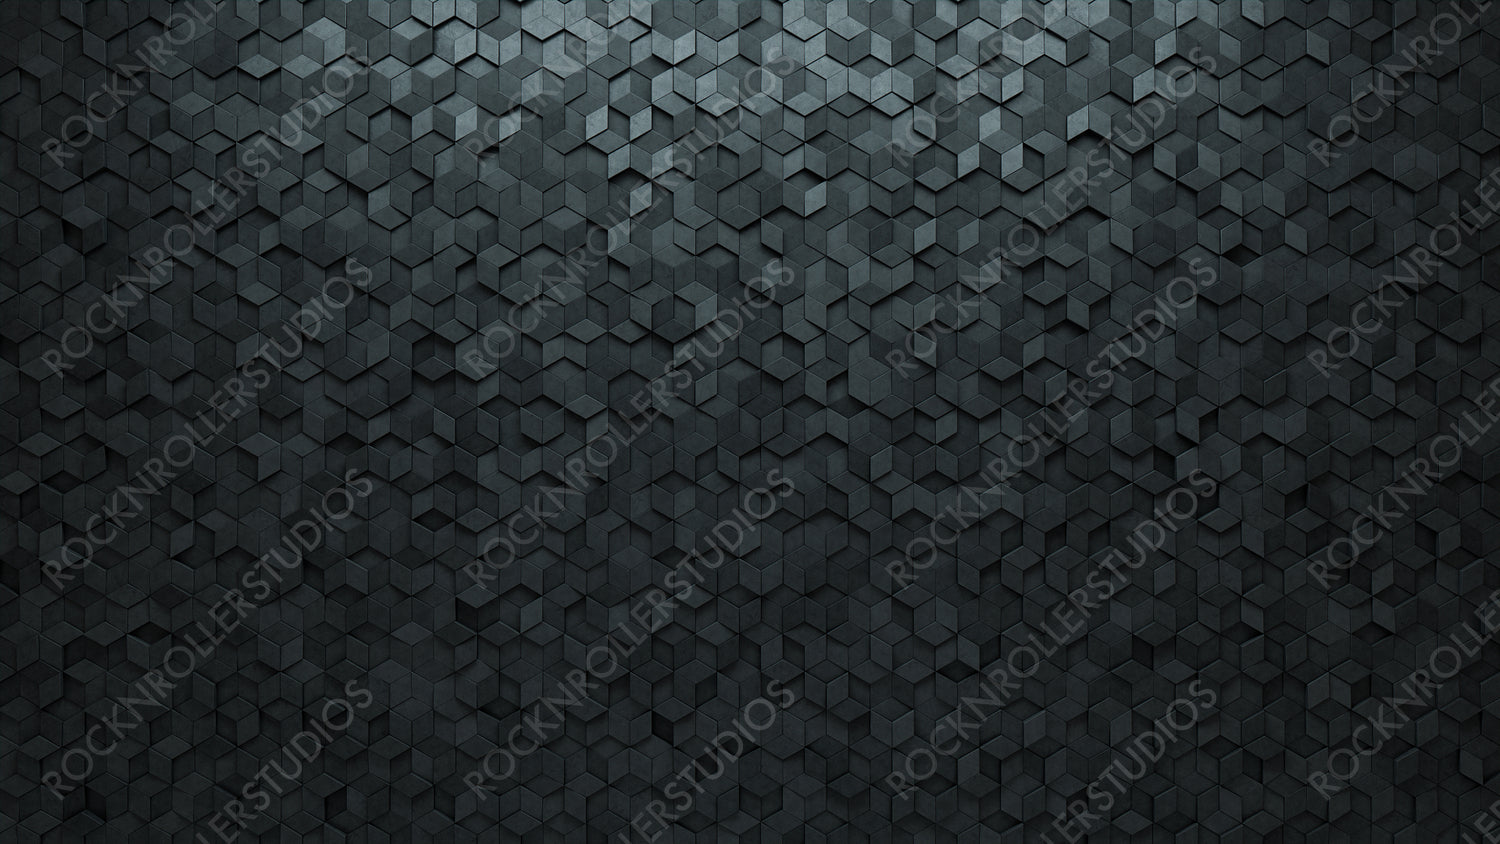 Semigloss Tiles arranged to create a Diamond Shaped wall. Concrete, 3D Background formed from Futuristic blocks. 3D Render